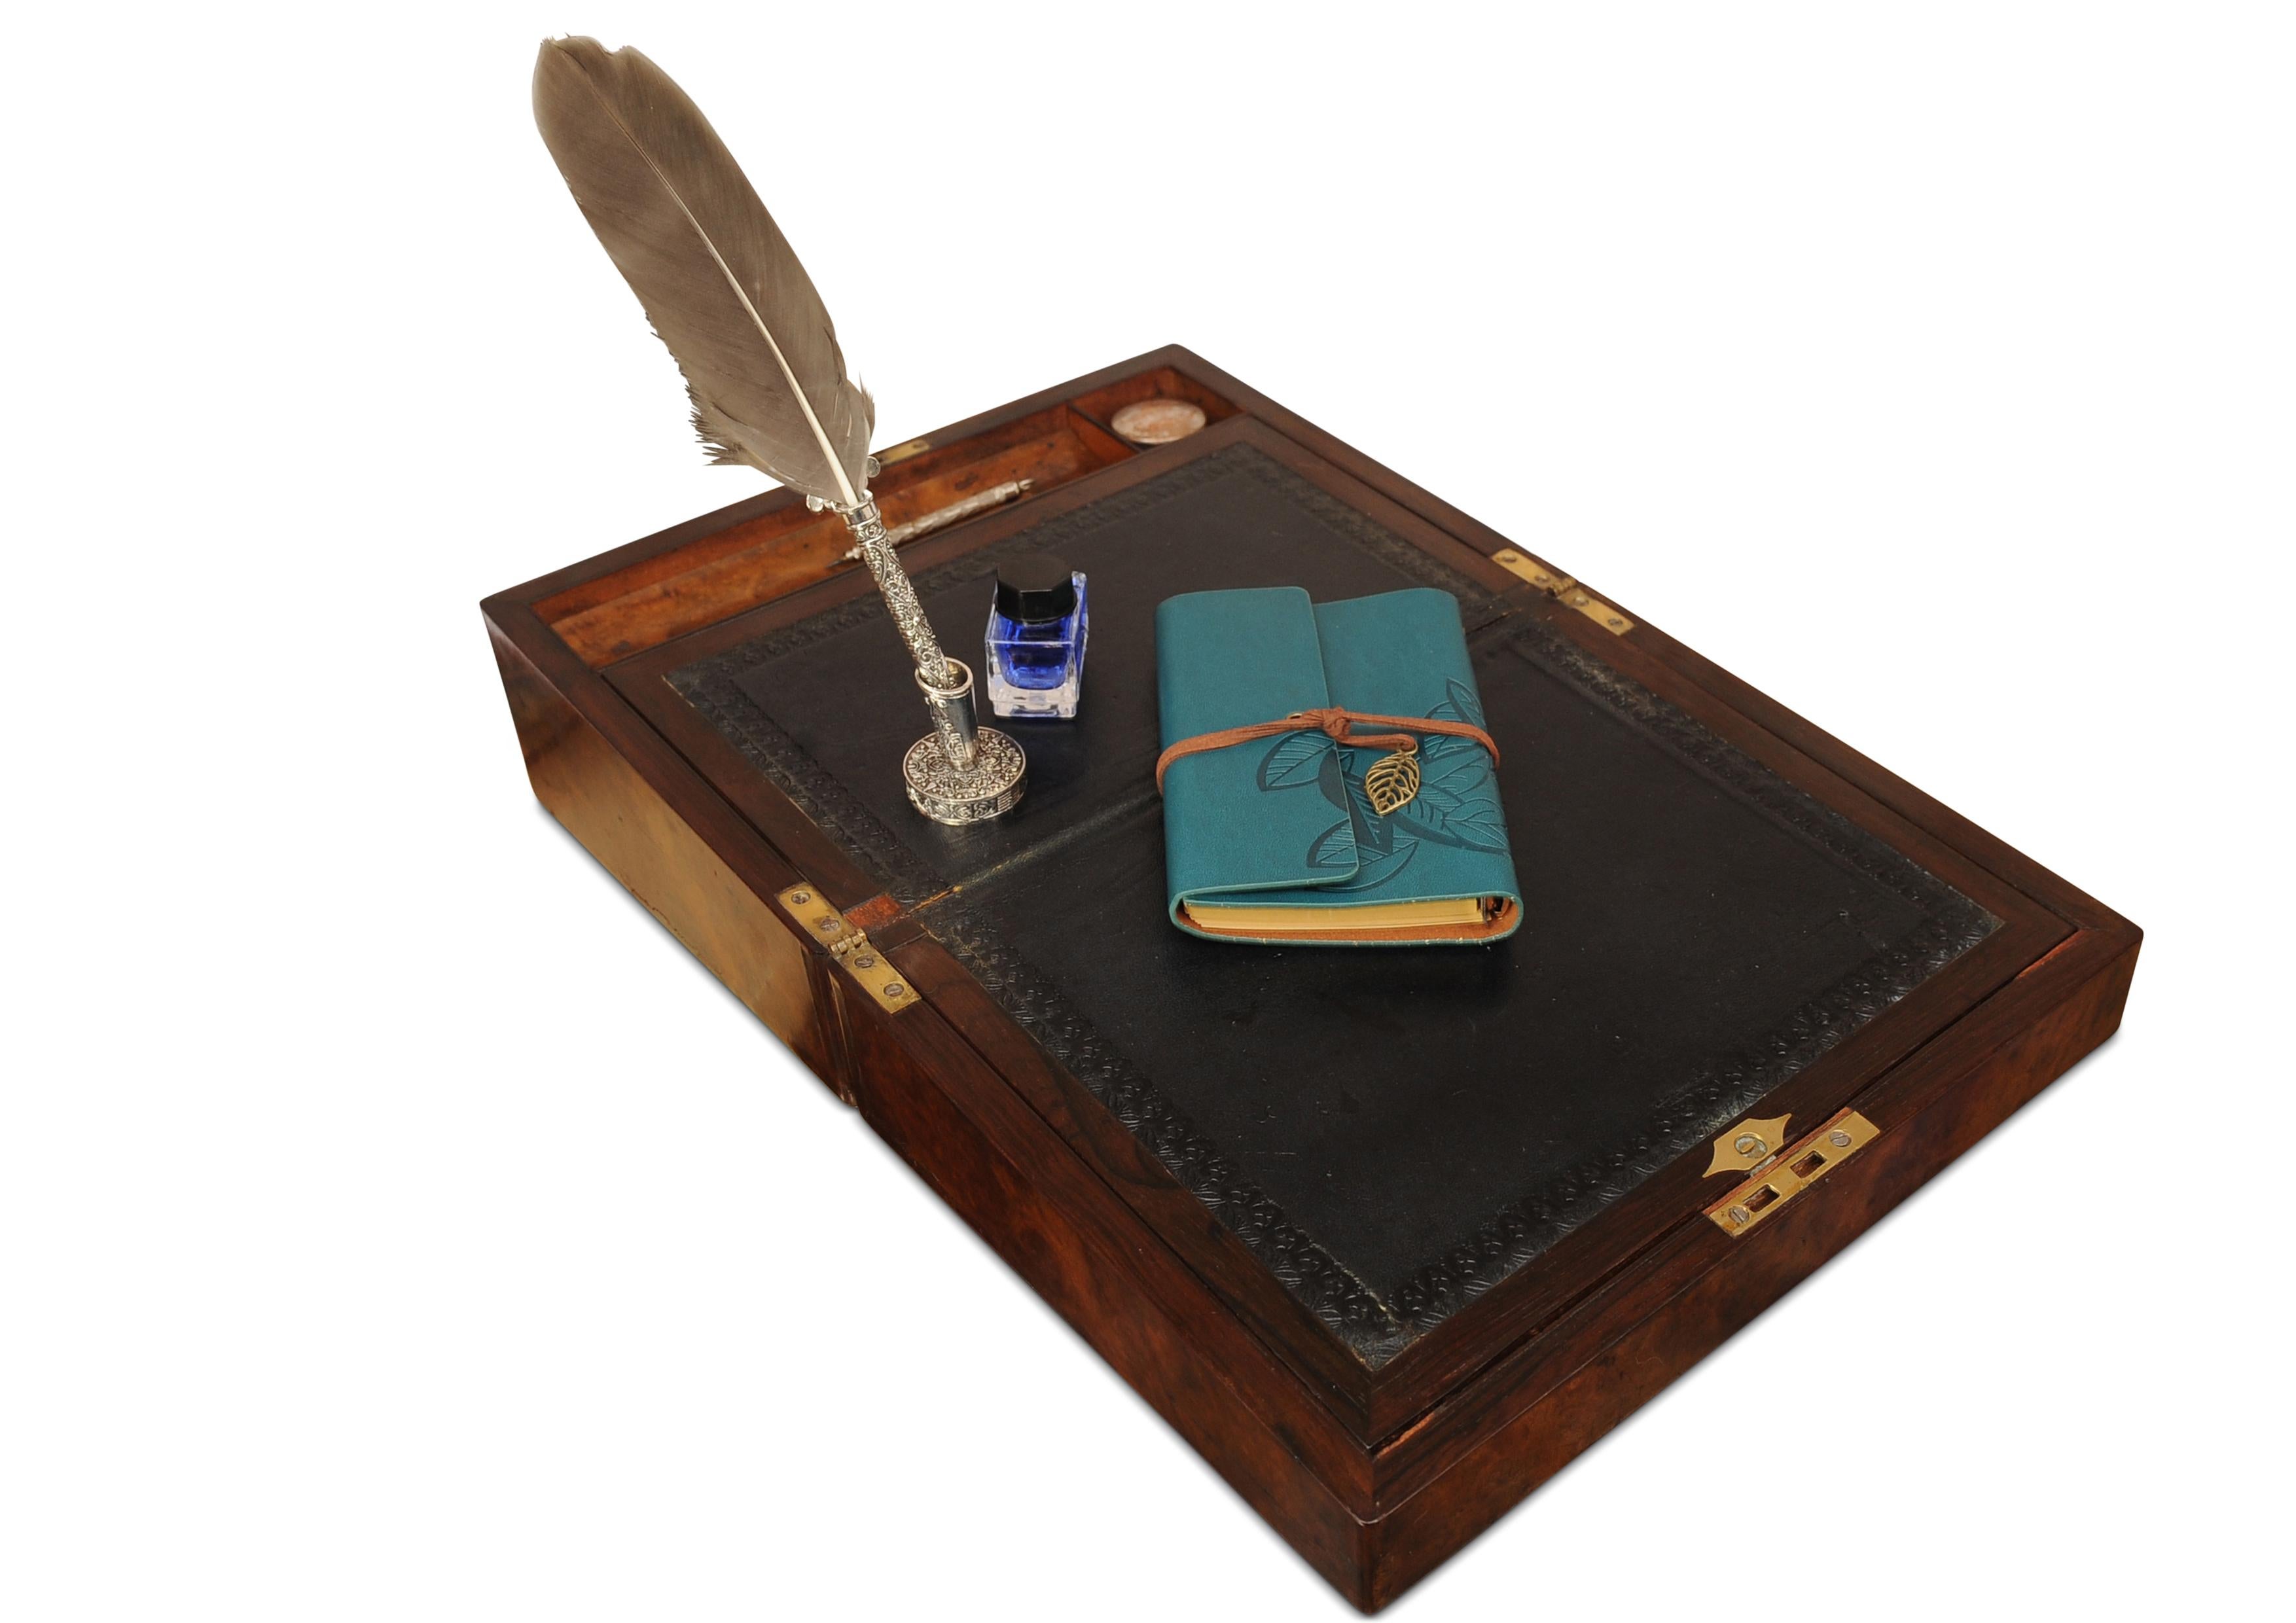 19th Century Burr Walnut Handcrafted Exquisite Writing Slope With Brass Inlay

A handcrafted exquisite writing slope with tooled leather fitted interior befit with a glass inkwell

Would make an ideal gift for the writing enthusiast.
Item will